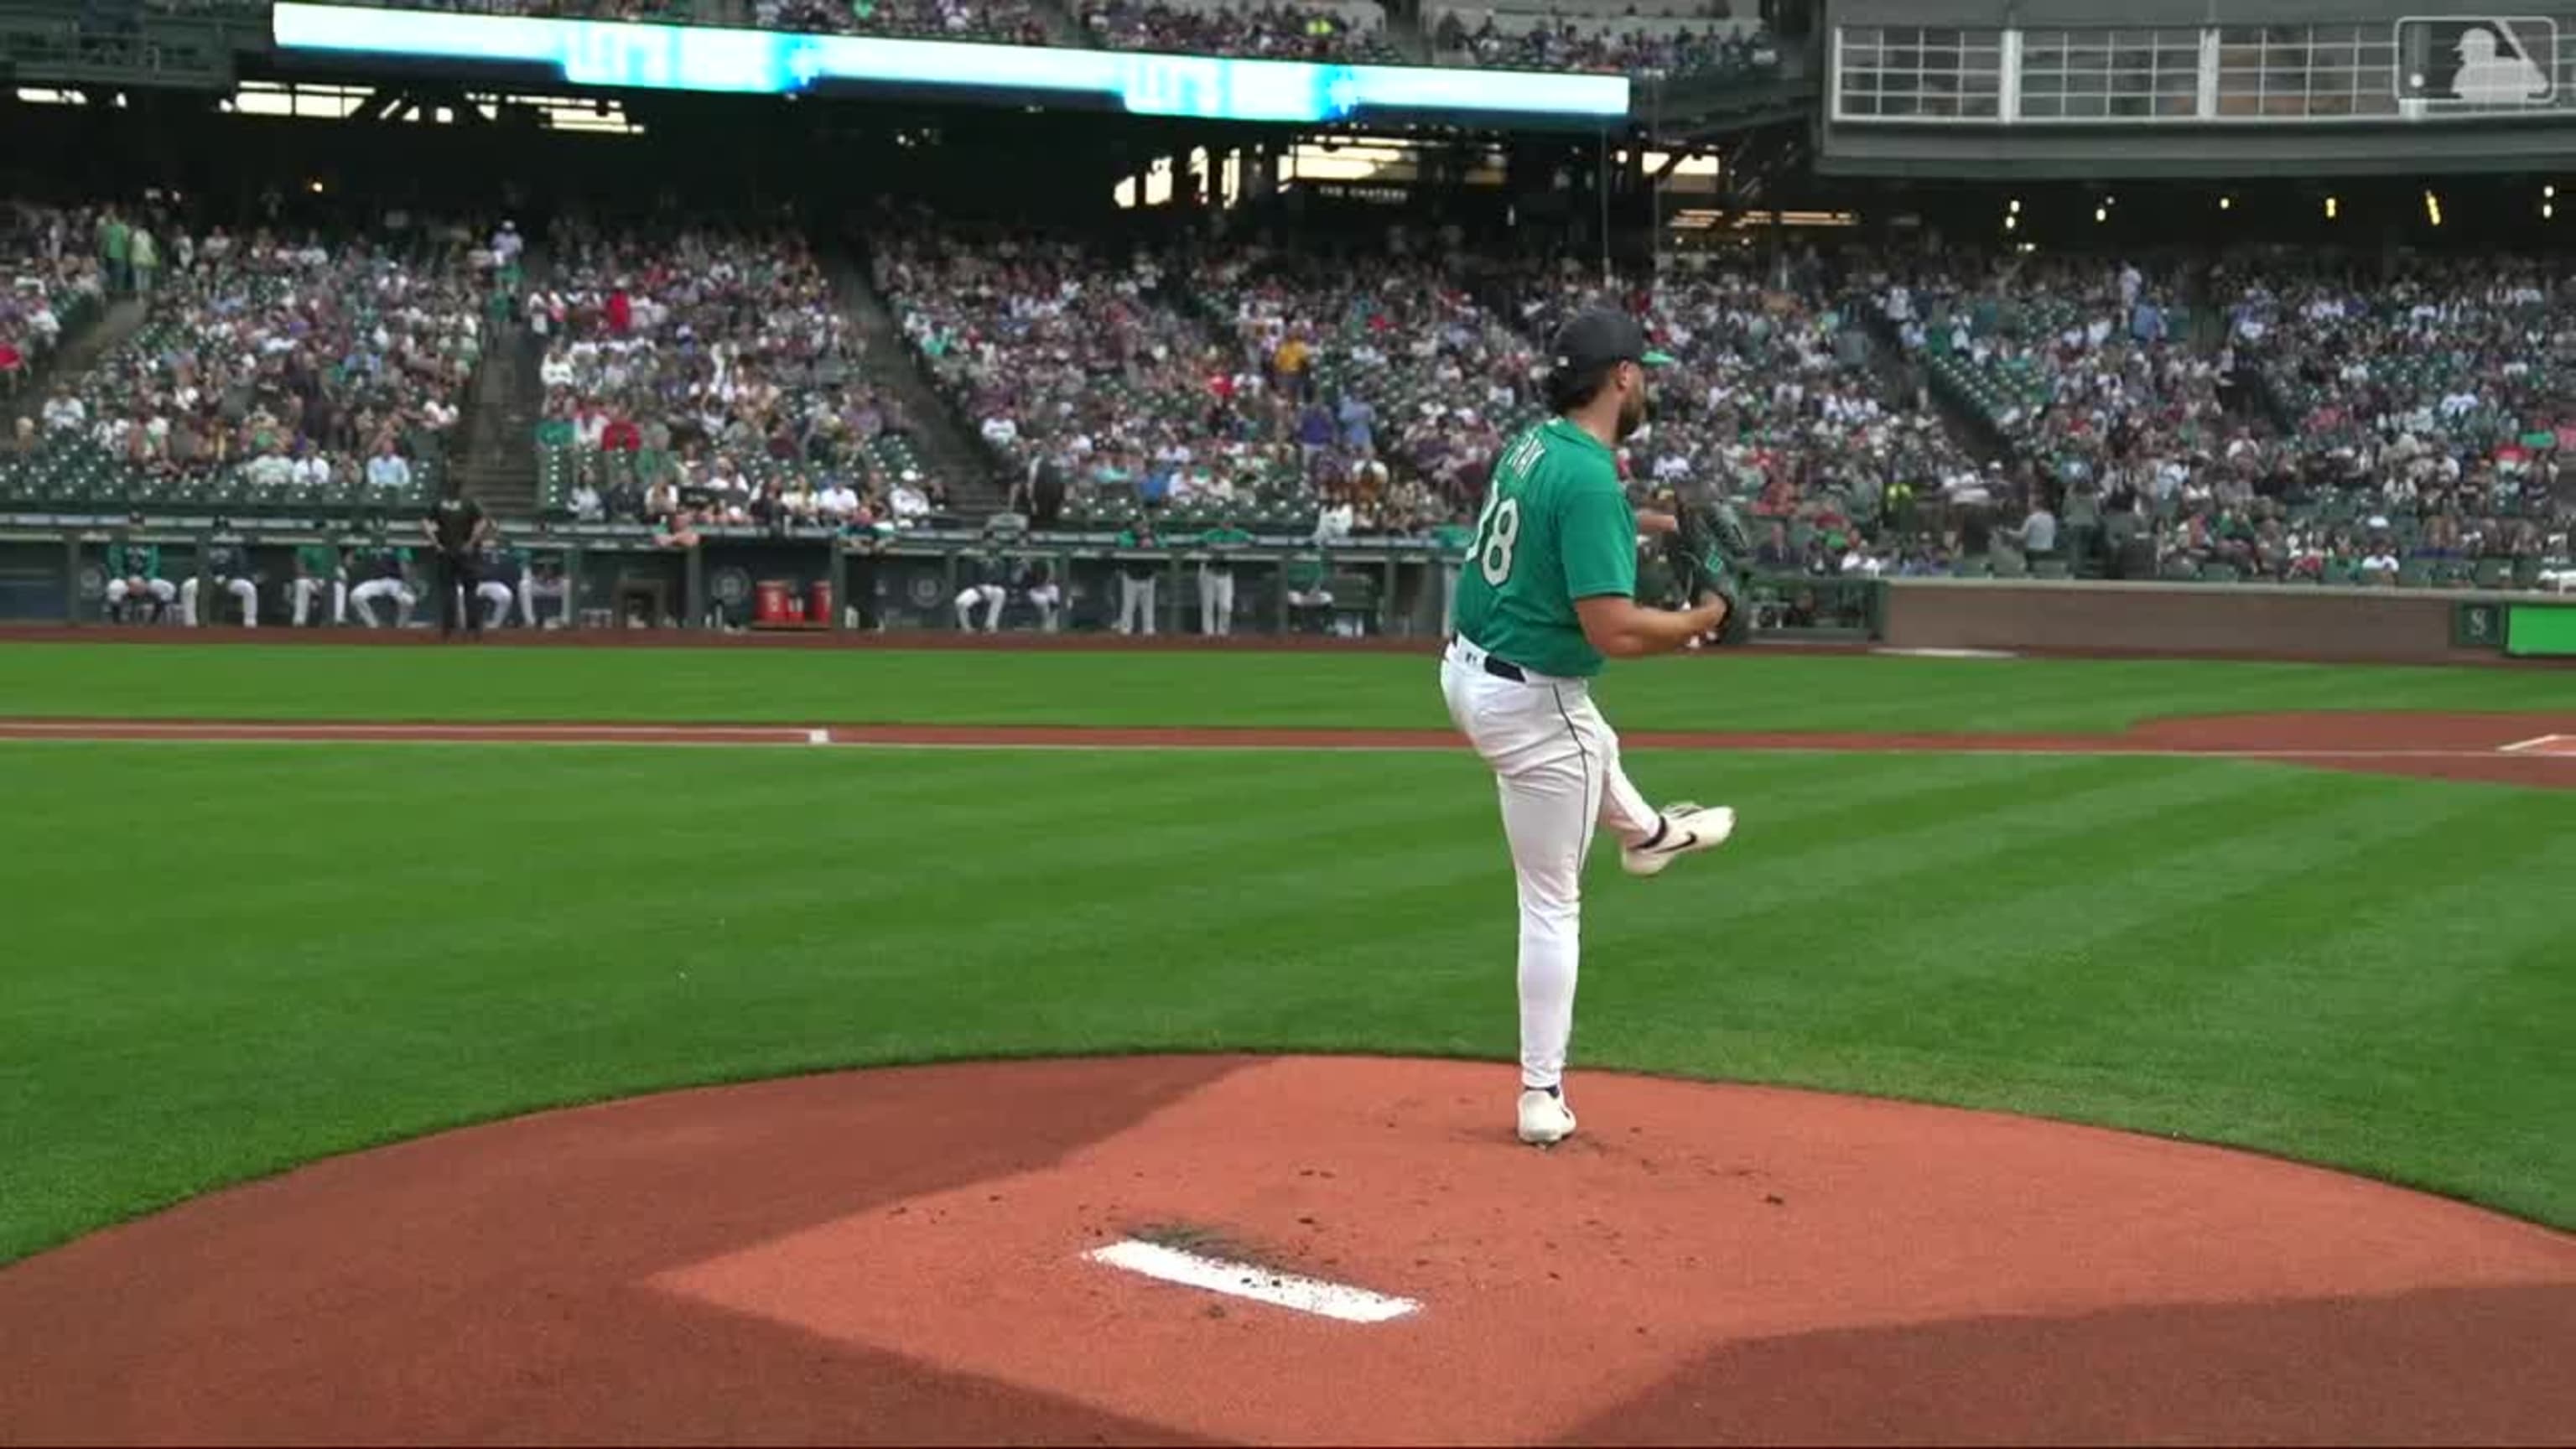 Robbie Ray records 6 strikeouts